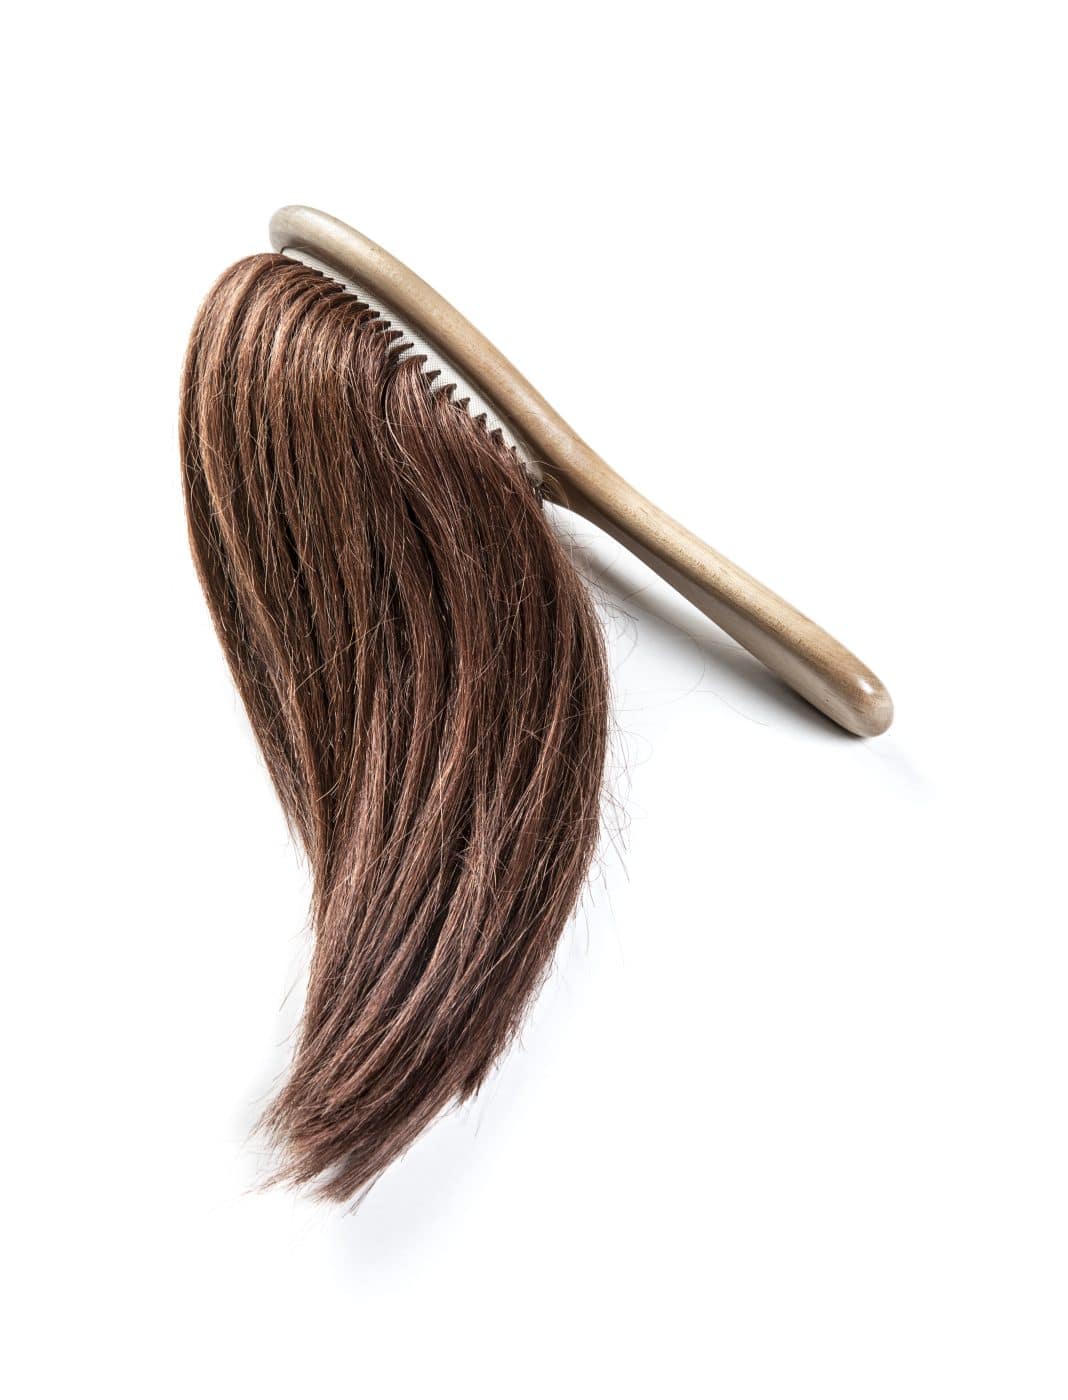 A hairbrush with long brown hair instead of bristles